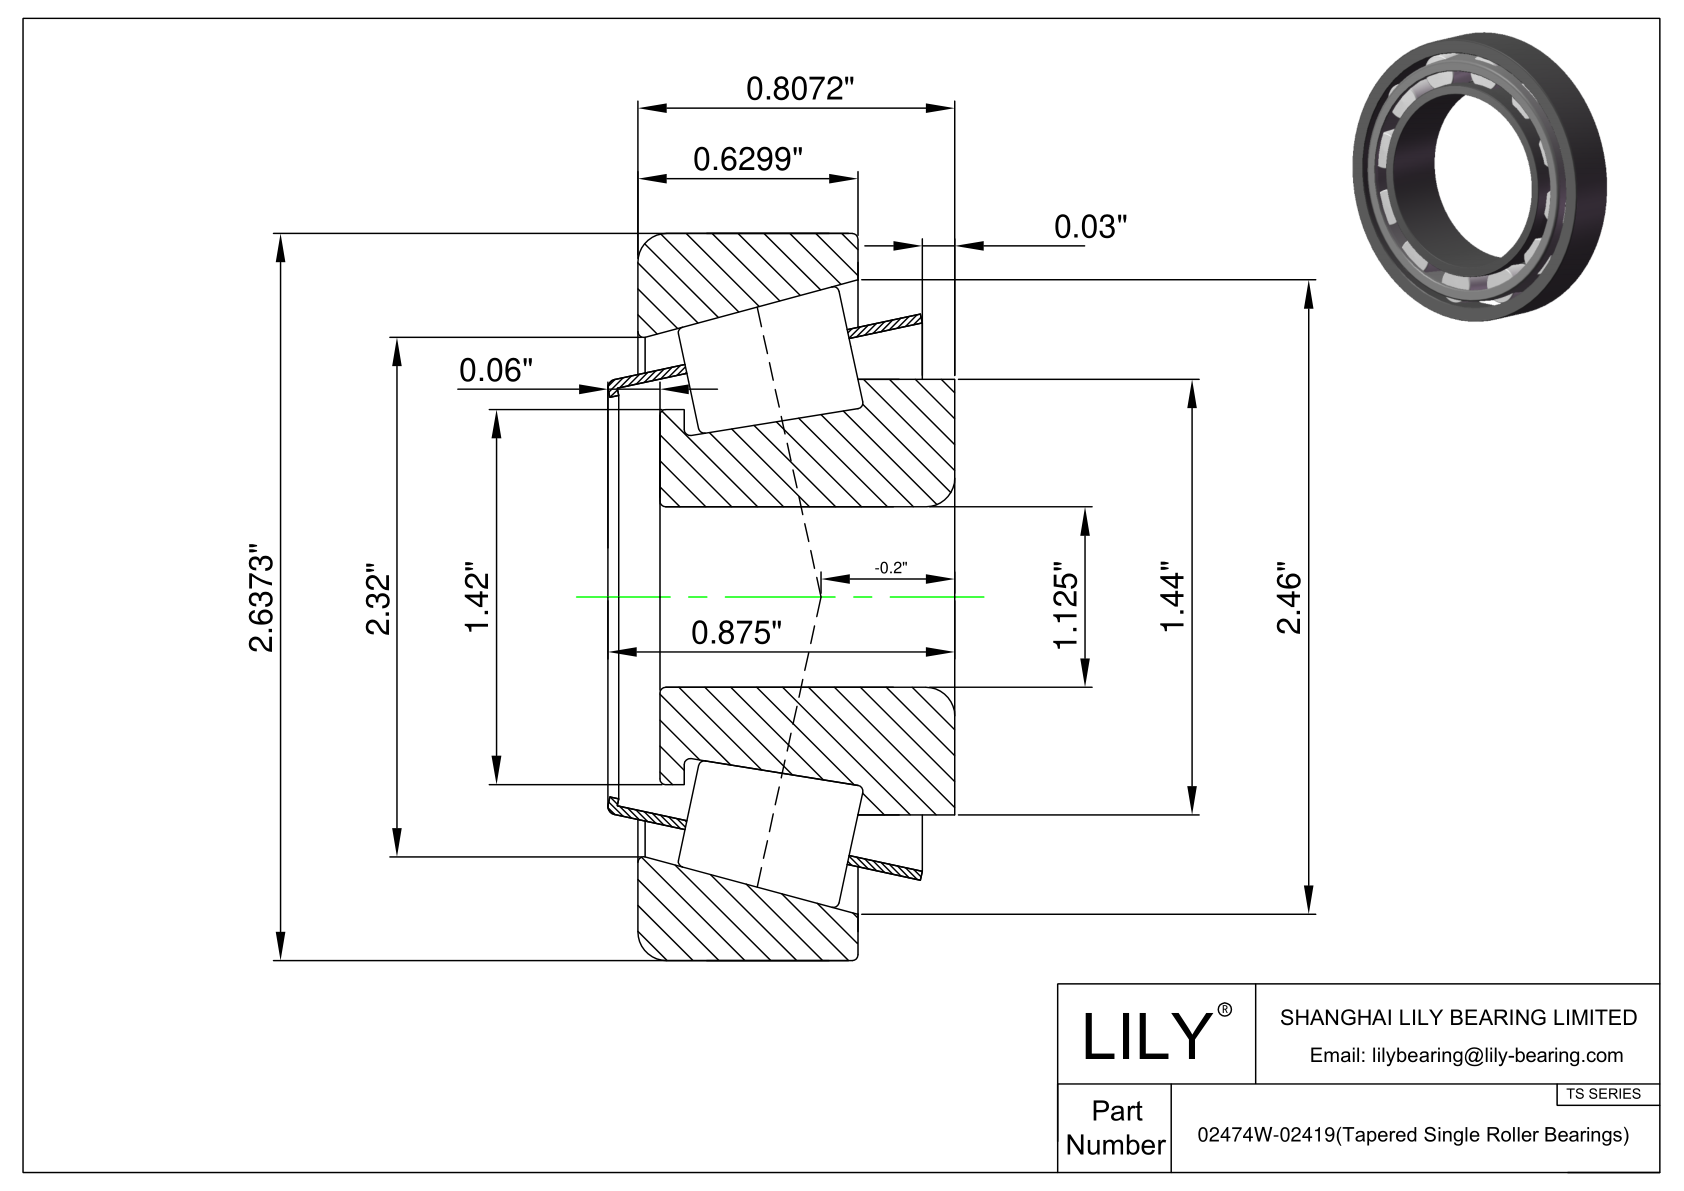 02474W-02419 TS (Tapered Single Roller Bearings) (Imperial) cad drawing